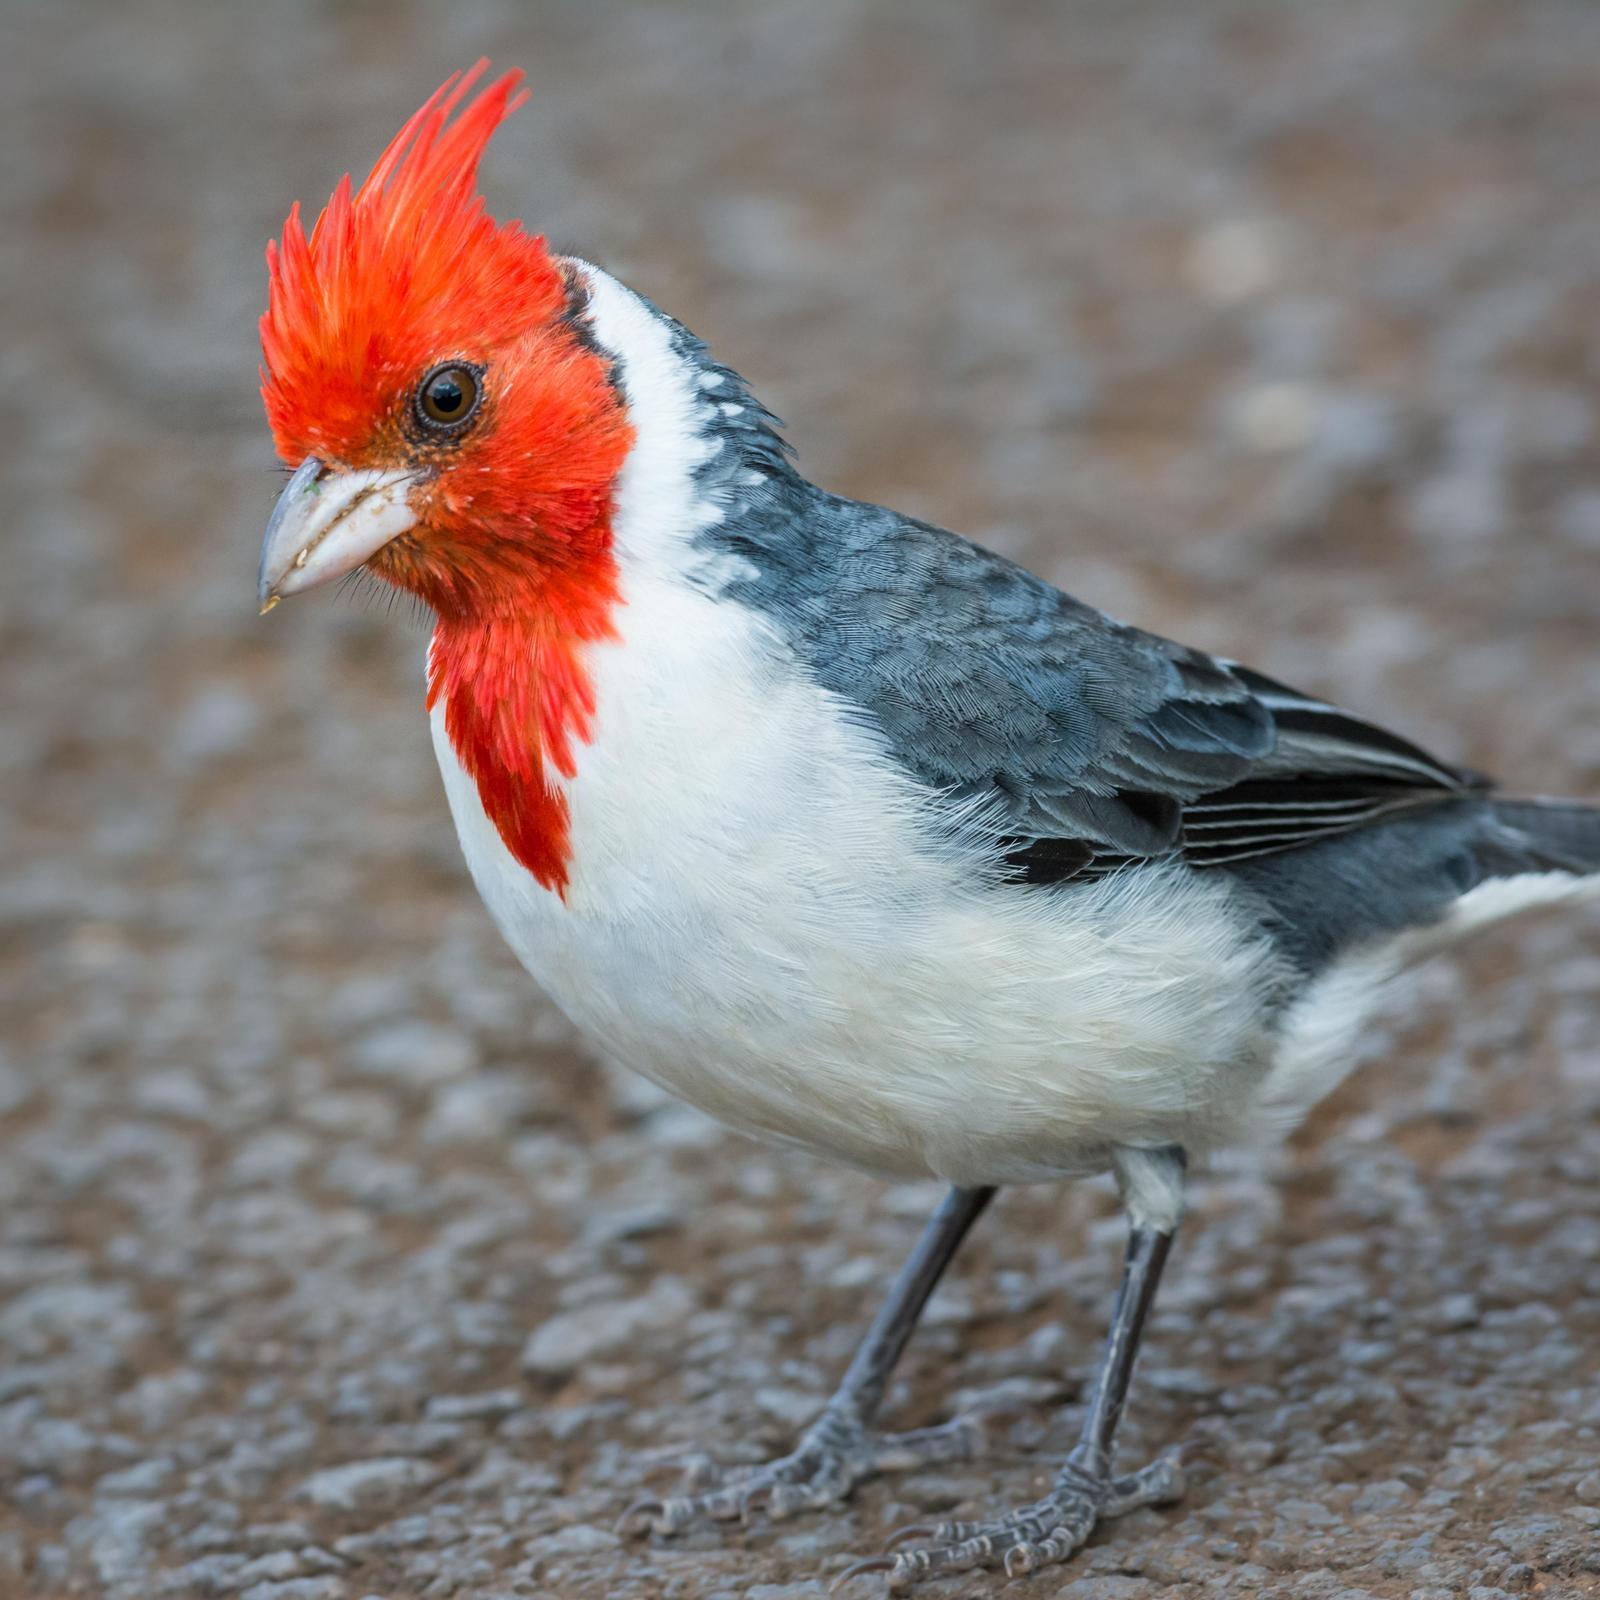 Red-crested Cardinal Photo by Jesse Hodges